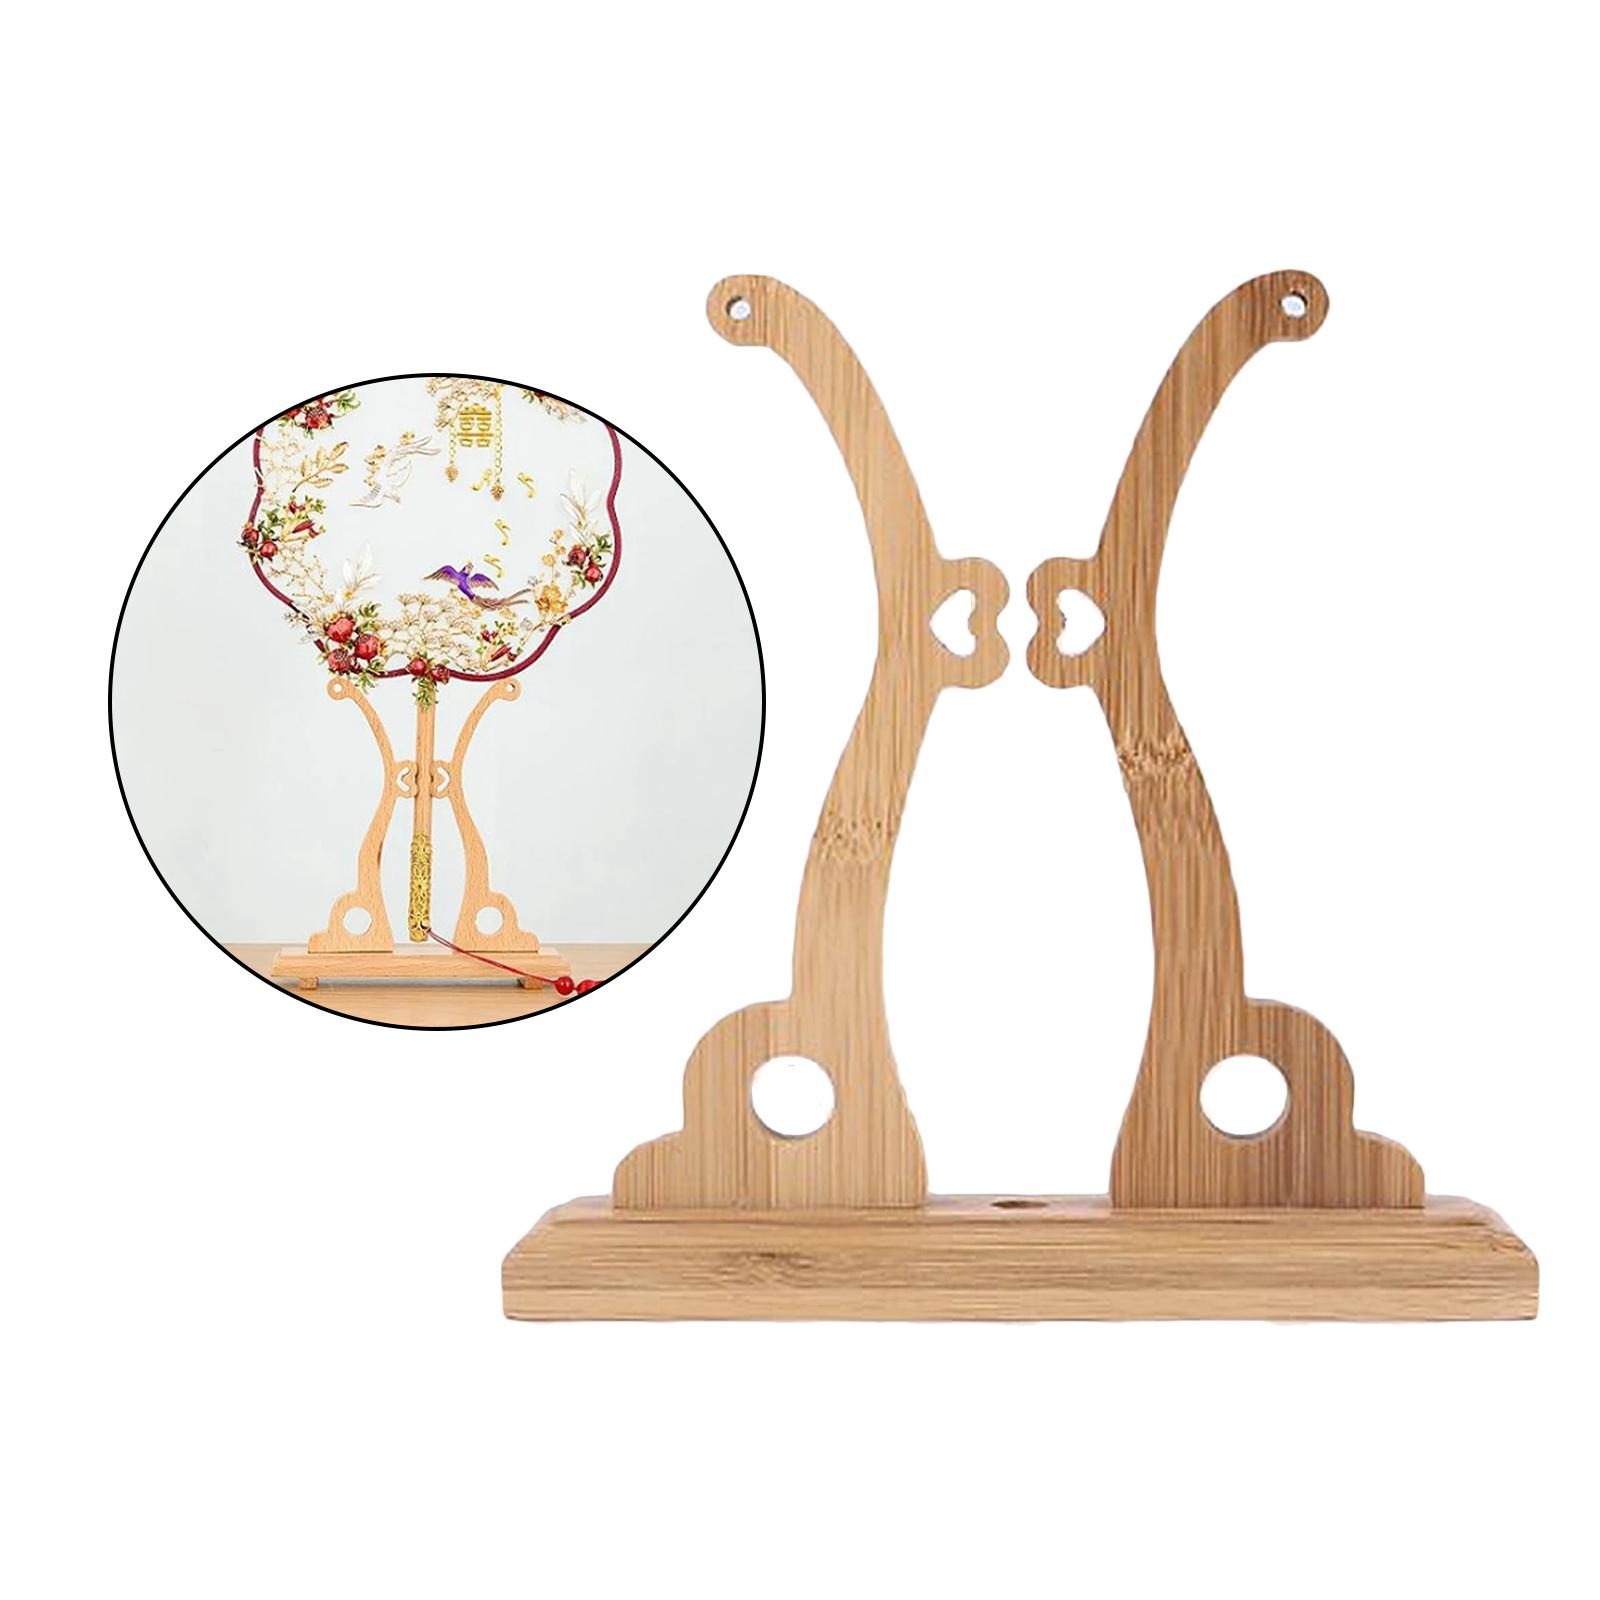 Bamboo Fans Palace Bracket Holder Stand for Chinese Style Round Circular Fan